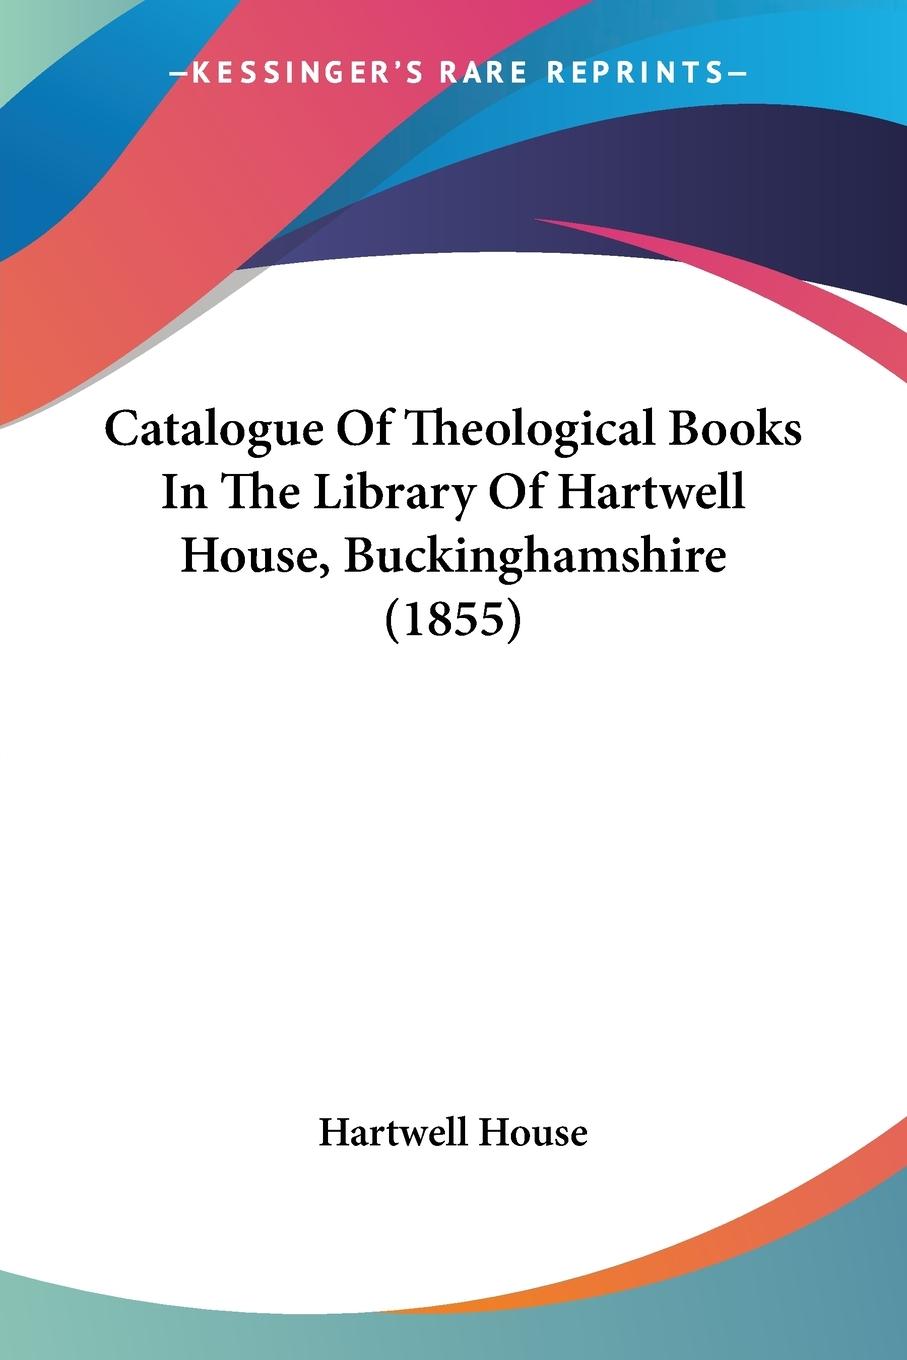 Catalogue Of Theological Books In The Library Of Hartwell House, Buckinghamshire (1855) - Hartwell House